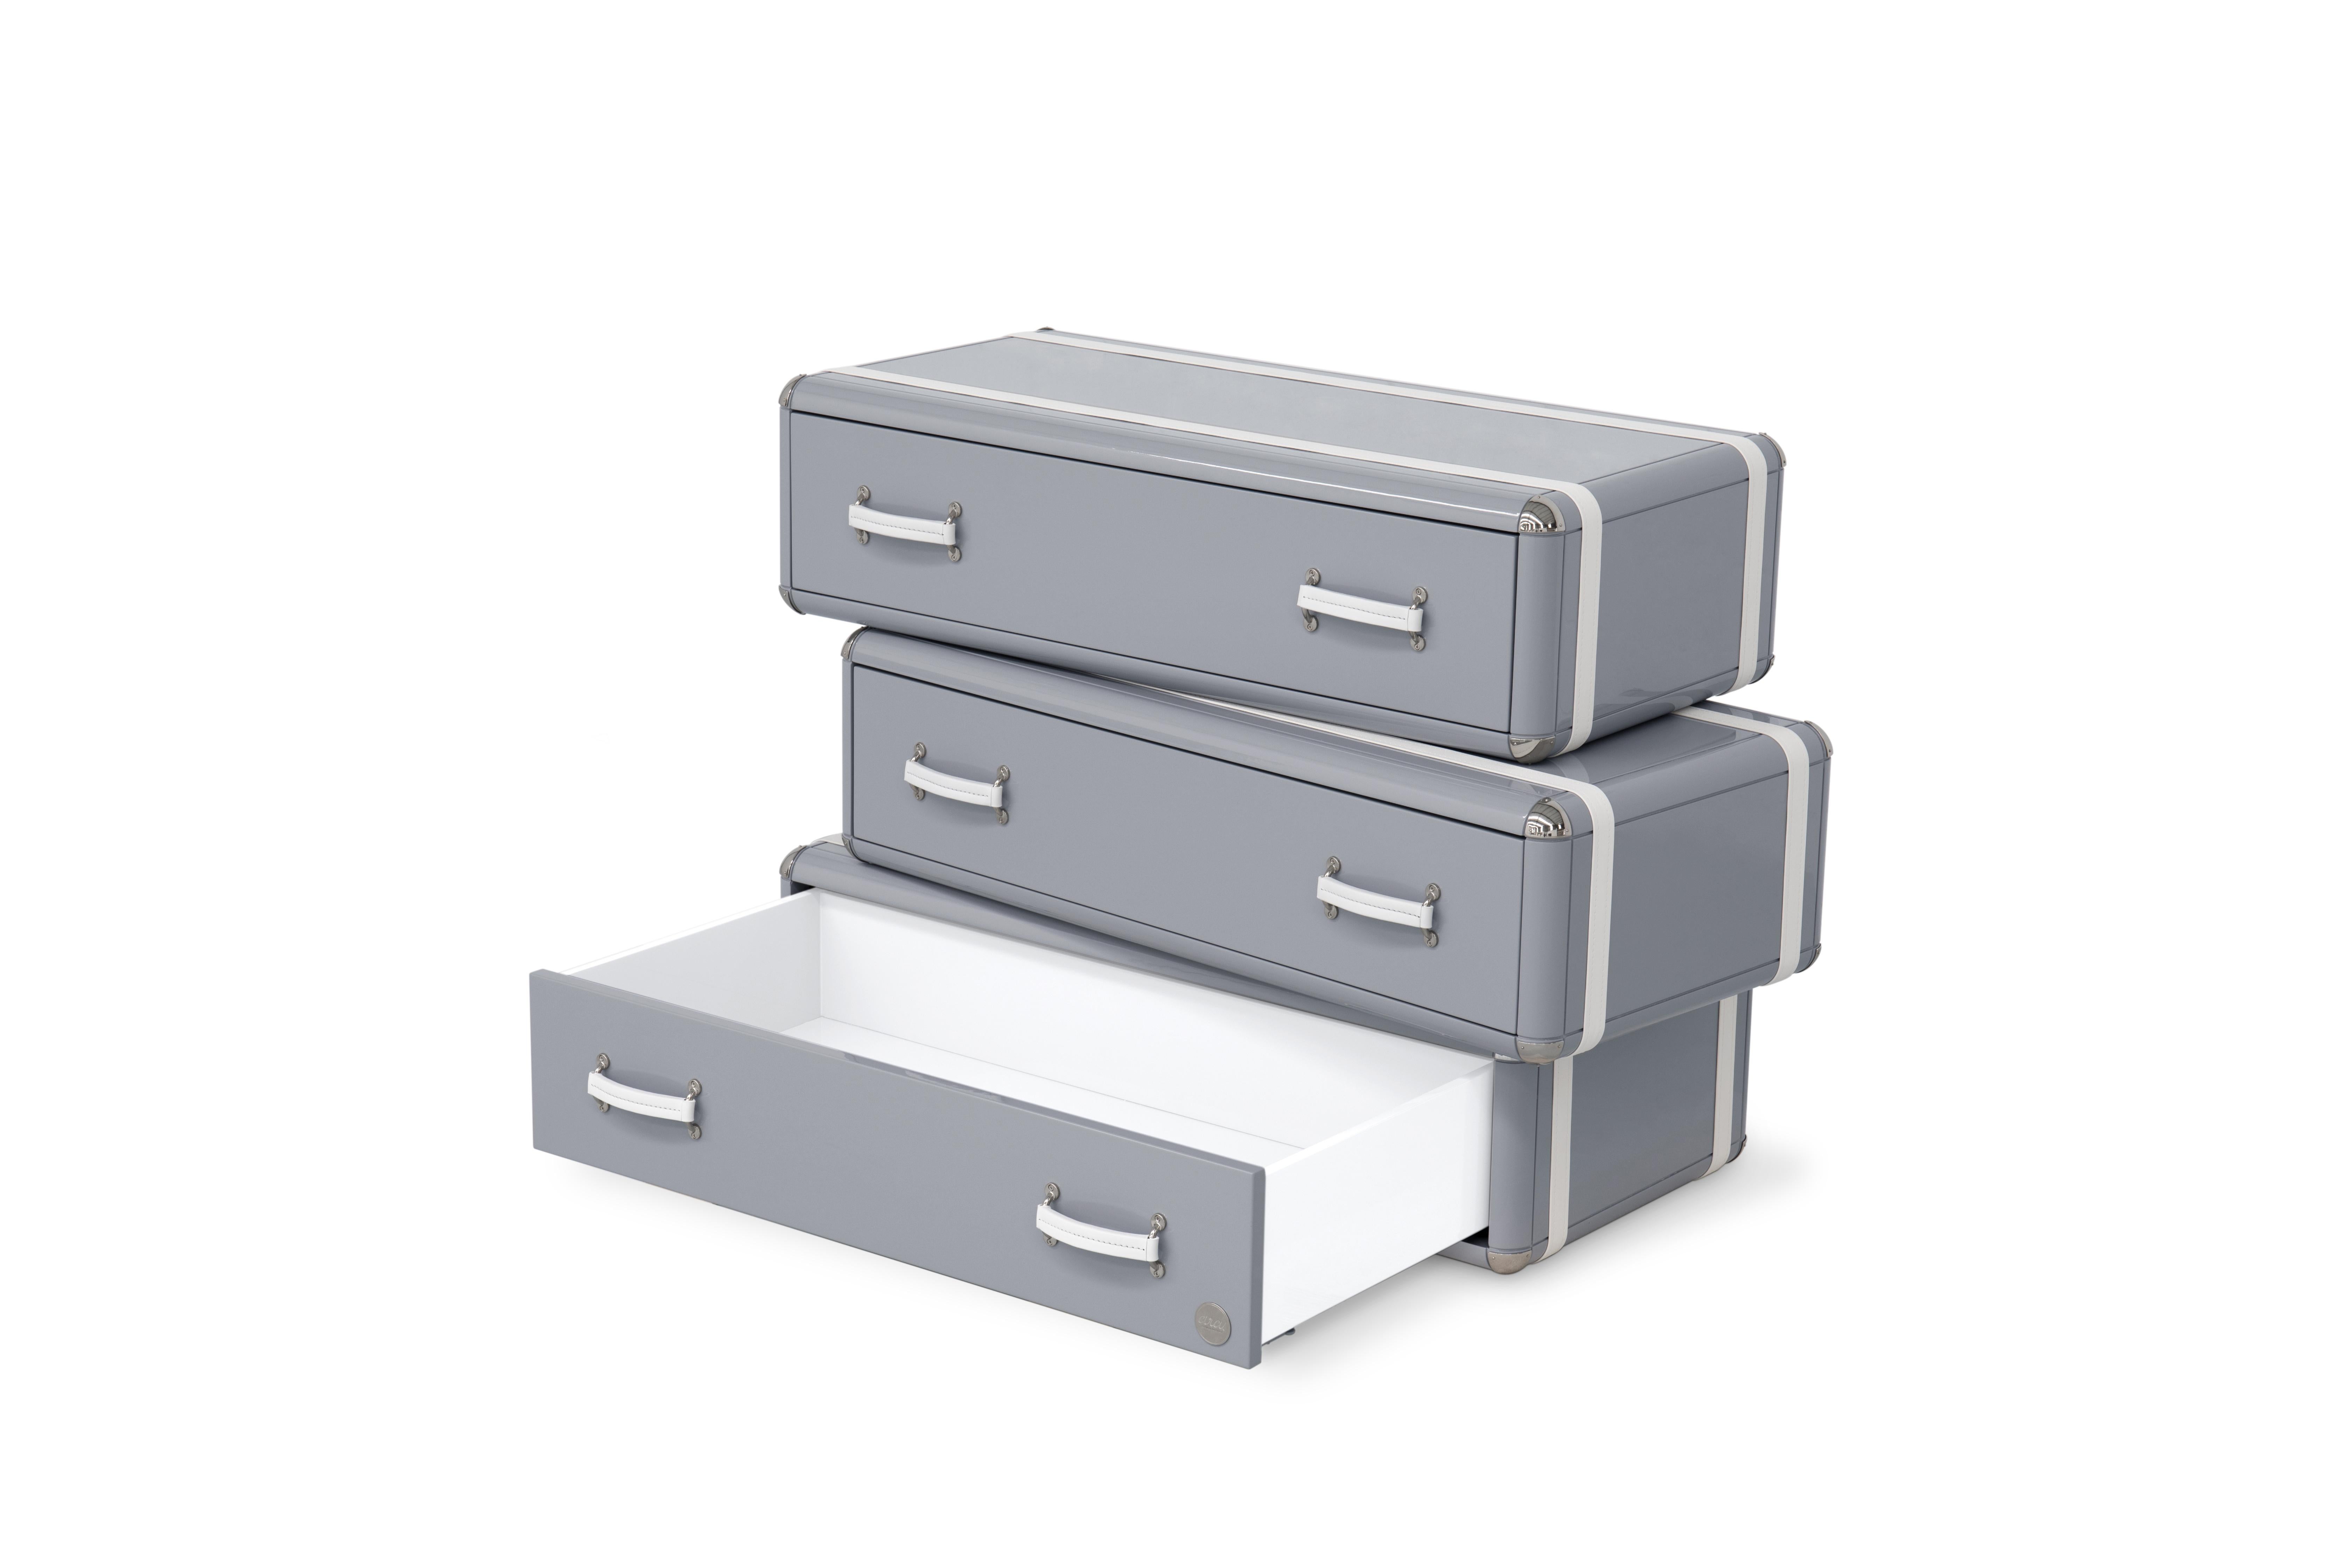 Sky Three-Drawers Kids Chest in Gray Lacquered Finish by Circu Magical Furniture

The Sky Chest is a kids’ chest of drawers inspired by the Disney movie “Planes” and it is the perfect storage item for your aviation-inspired bedroom decoration. With